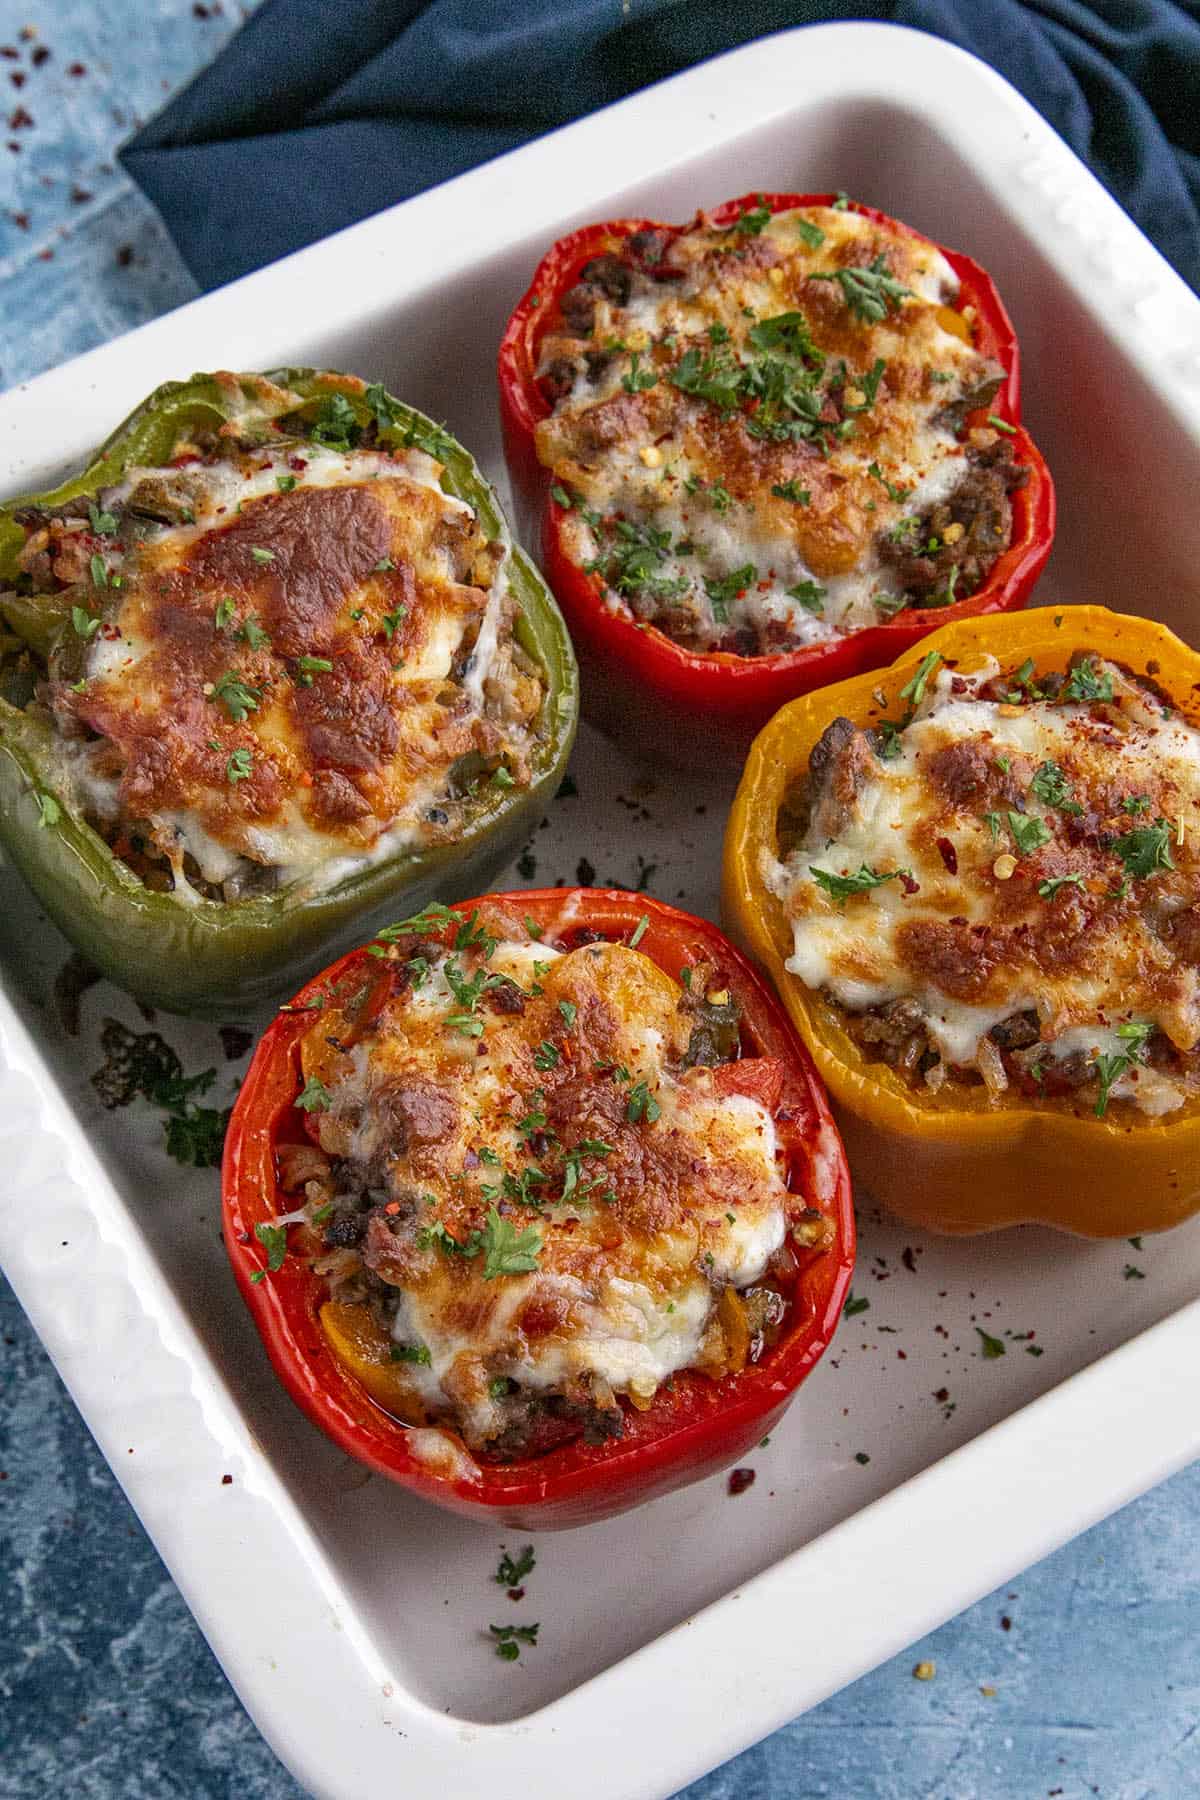 4 stuffed bell peppers out of the oven with melty cheese on top